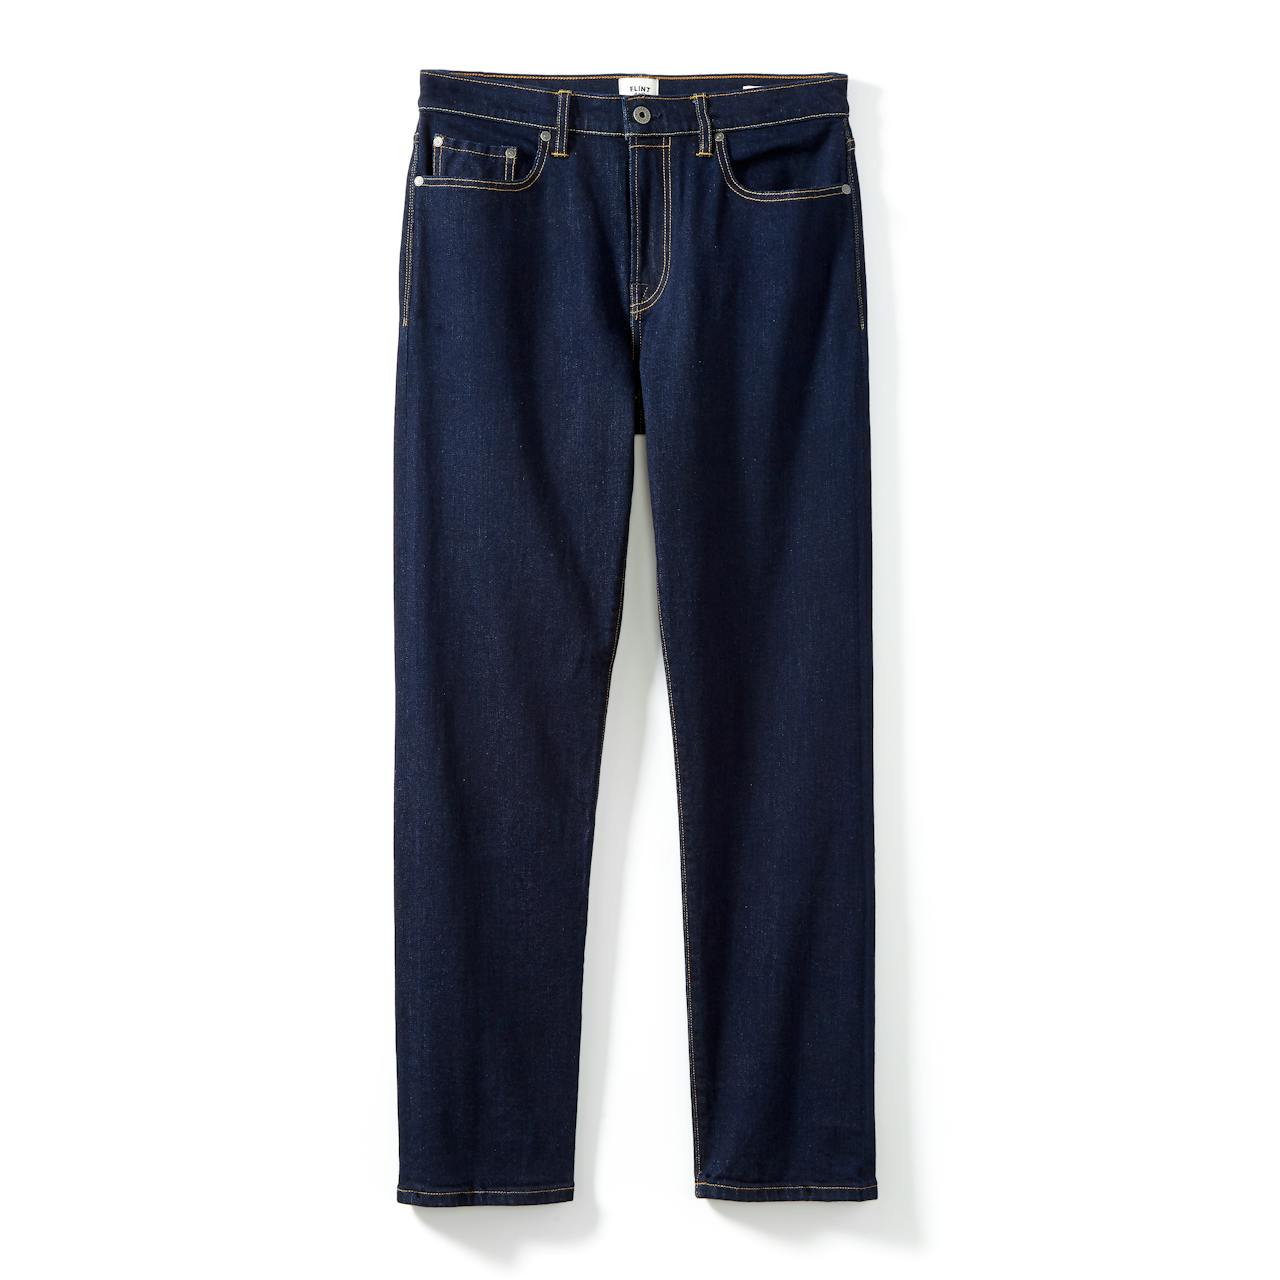 Flint and Tinder Stretch Selvage Jeans - Tapered